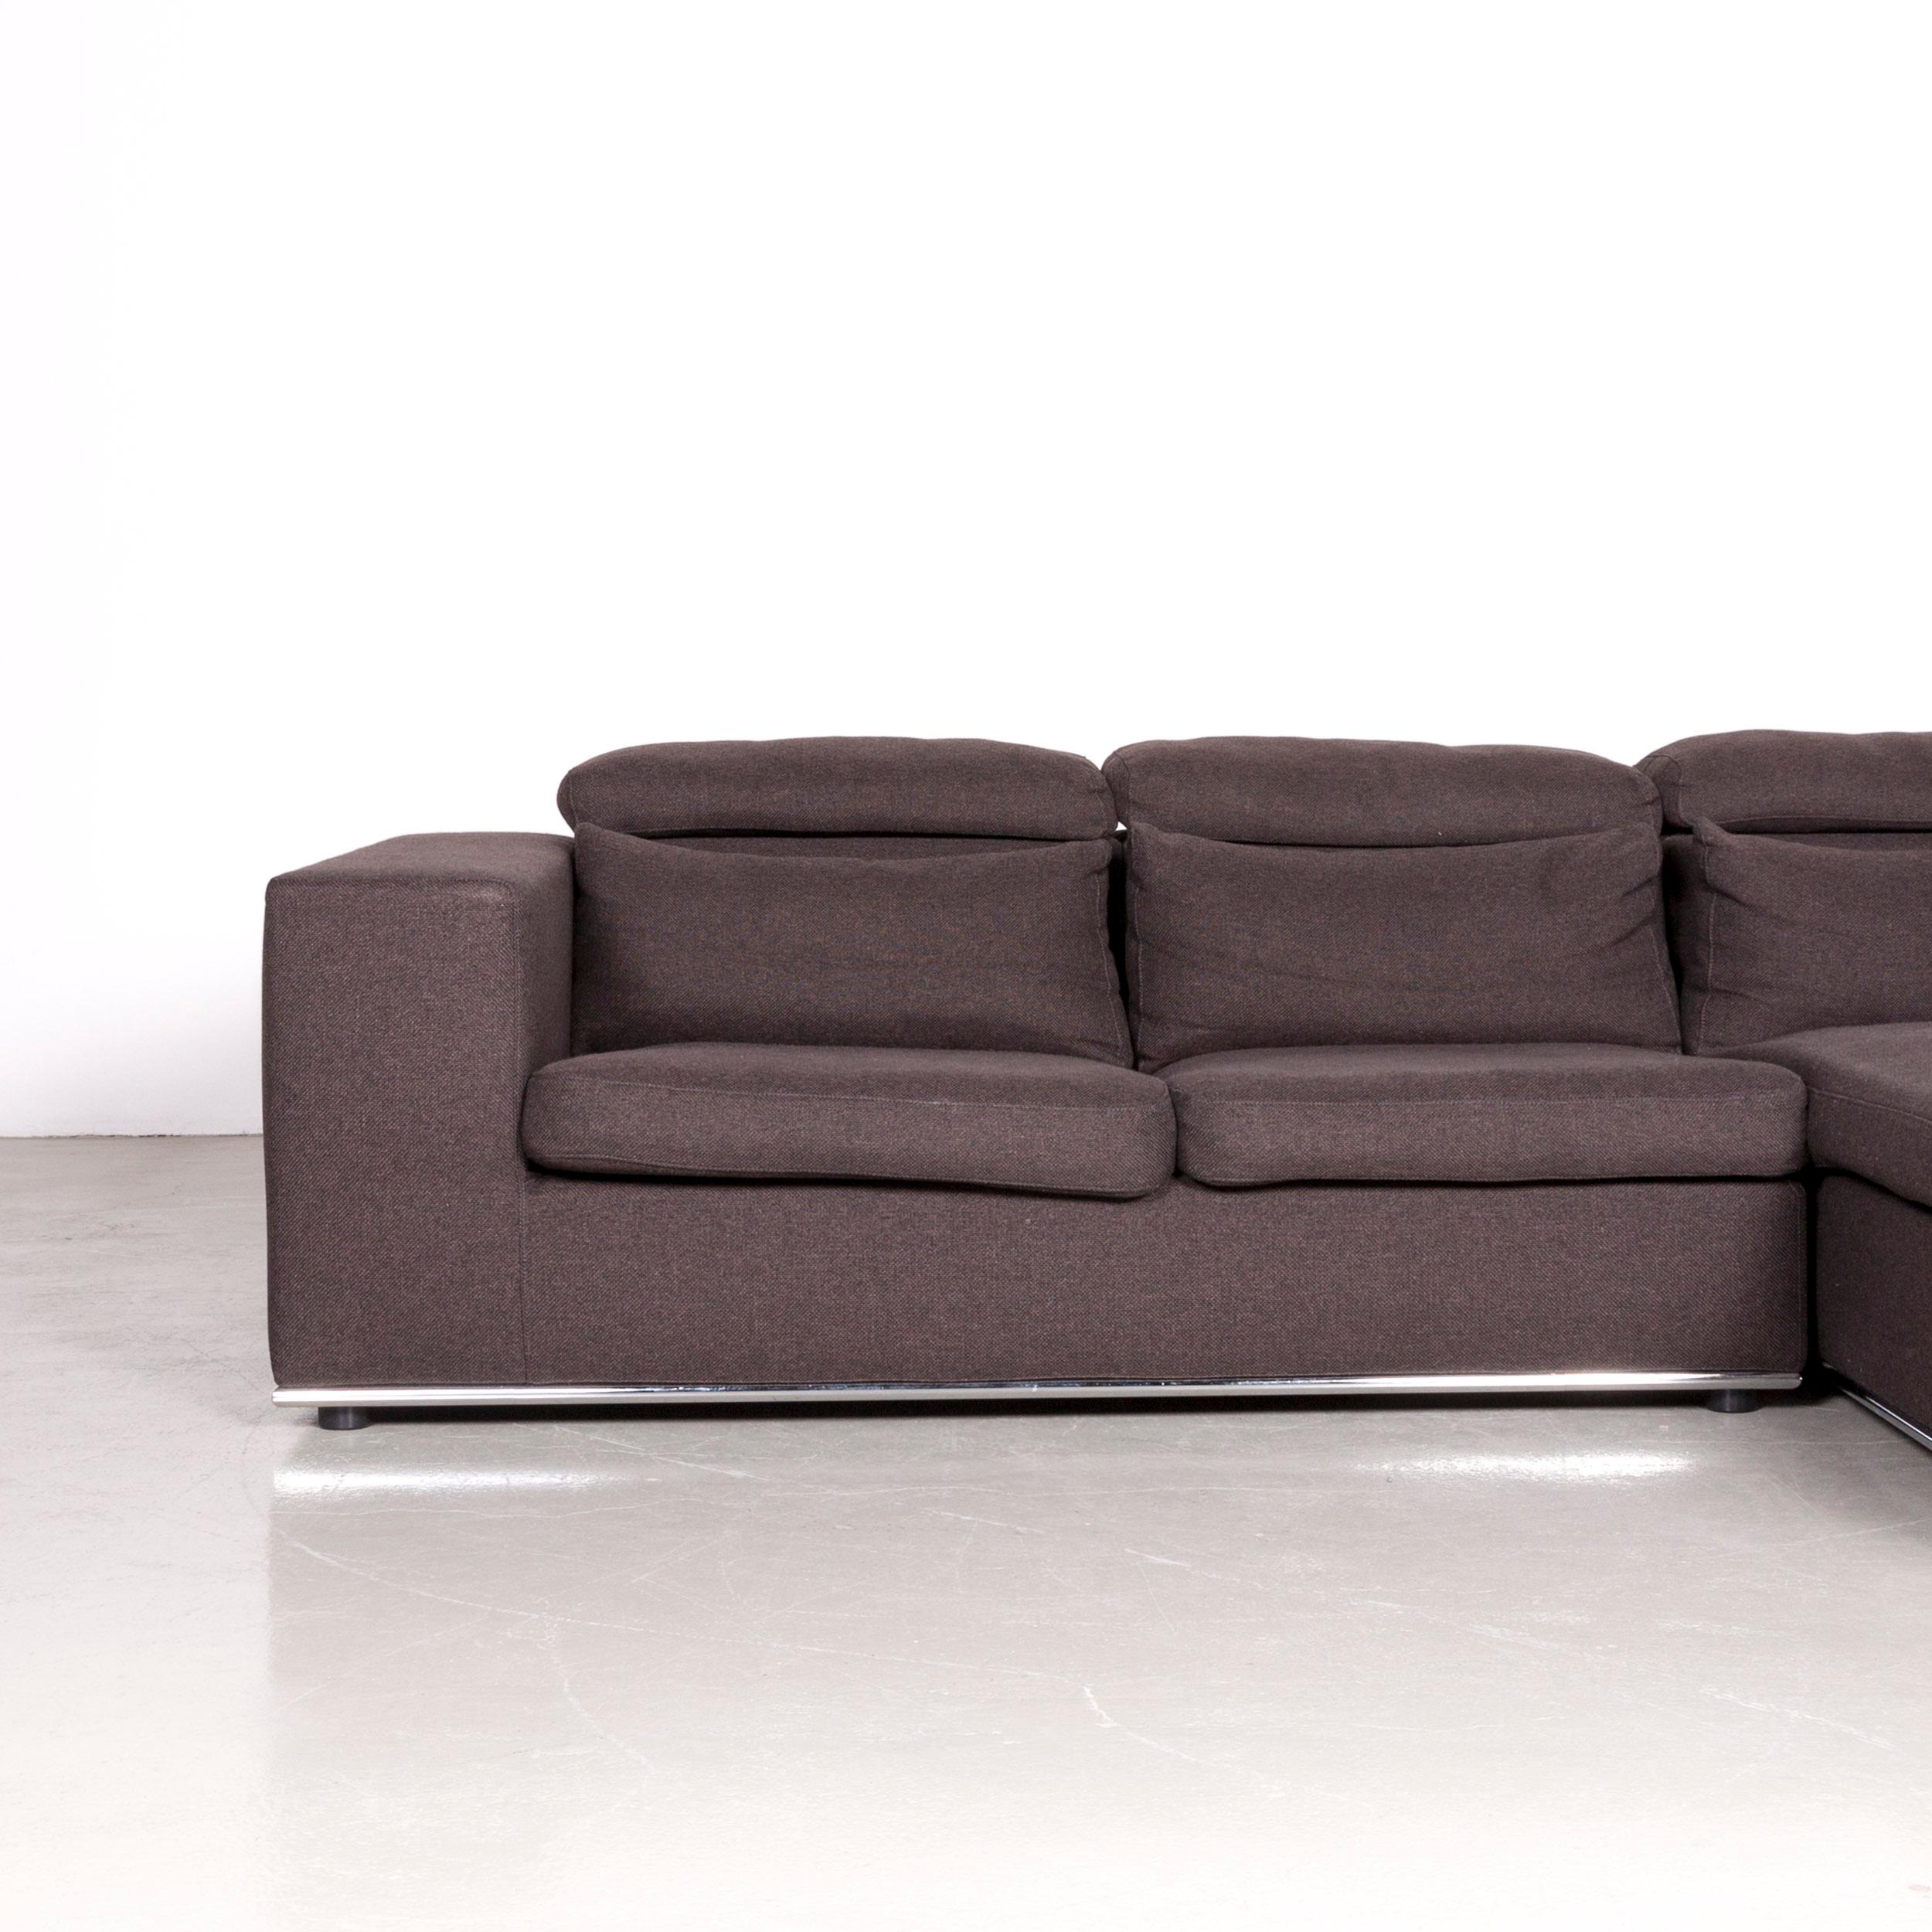 German Who's Perfect Toronto Designer Fabric Corner-Sofa Anthracite Couch For Sale